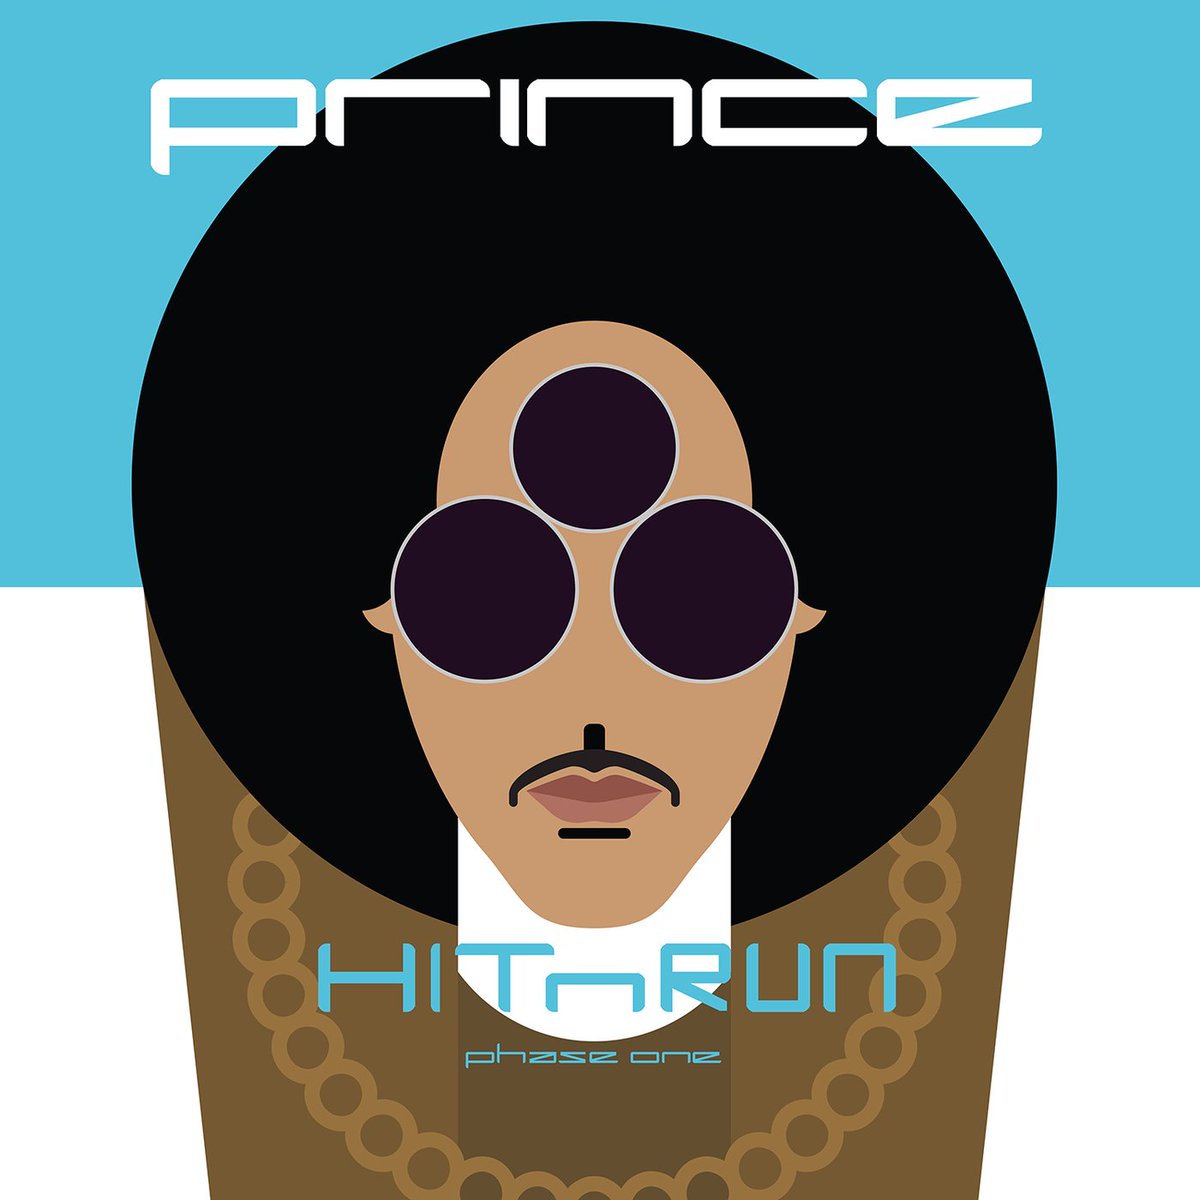 HITnRUN Phase One released September 7, 2015. Did well on the R&B charts, peaking #2 on the R&B Albums Chart https://album.link/us/i/1440937466 